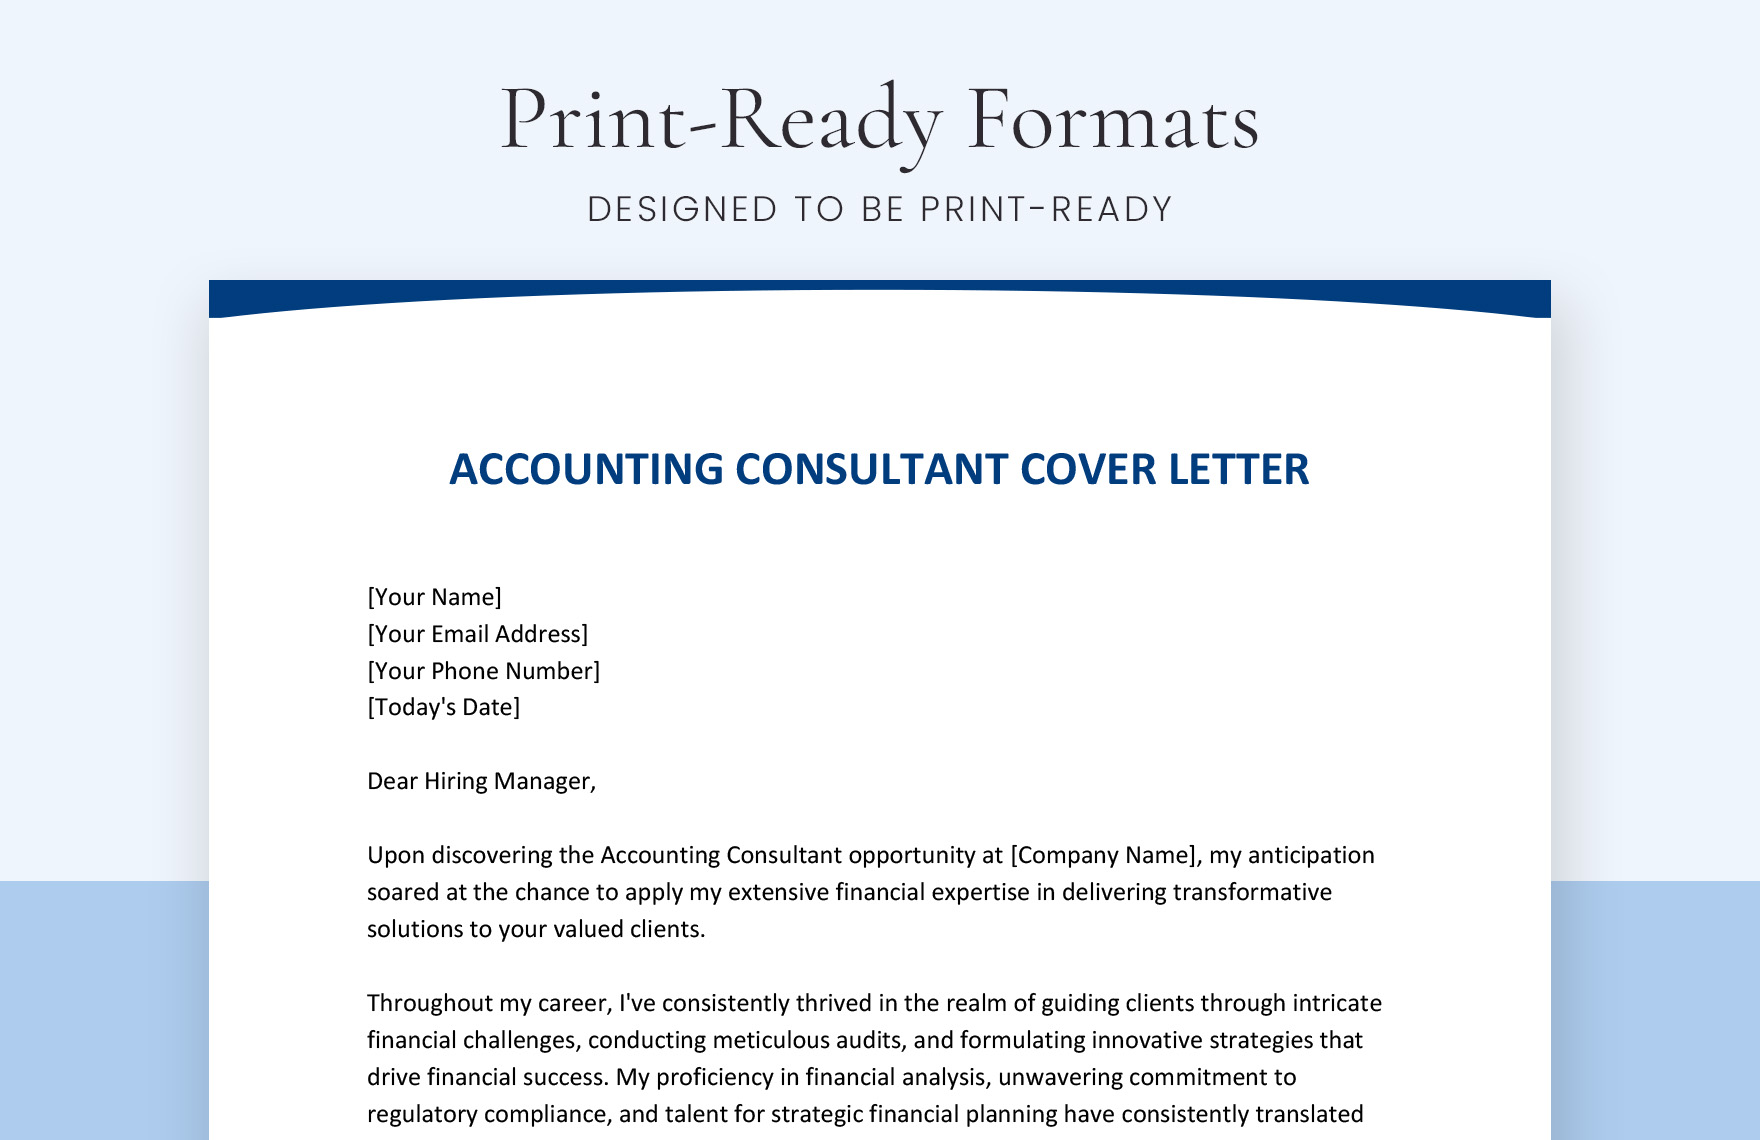 Accounting Consultant Cover Letter